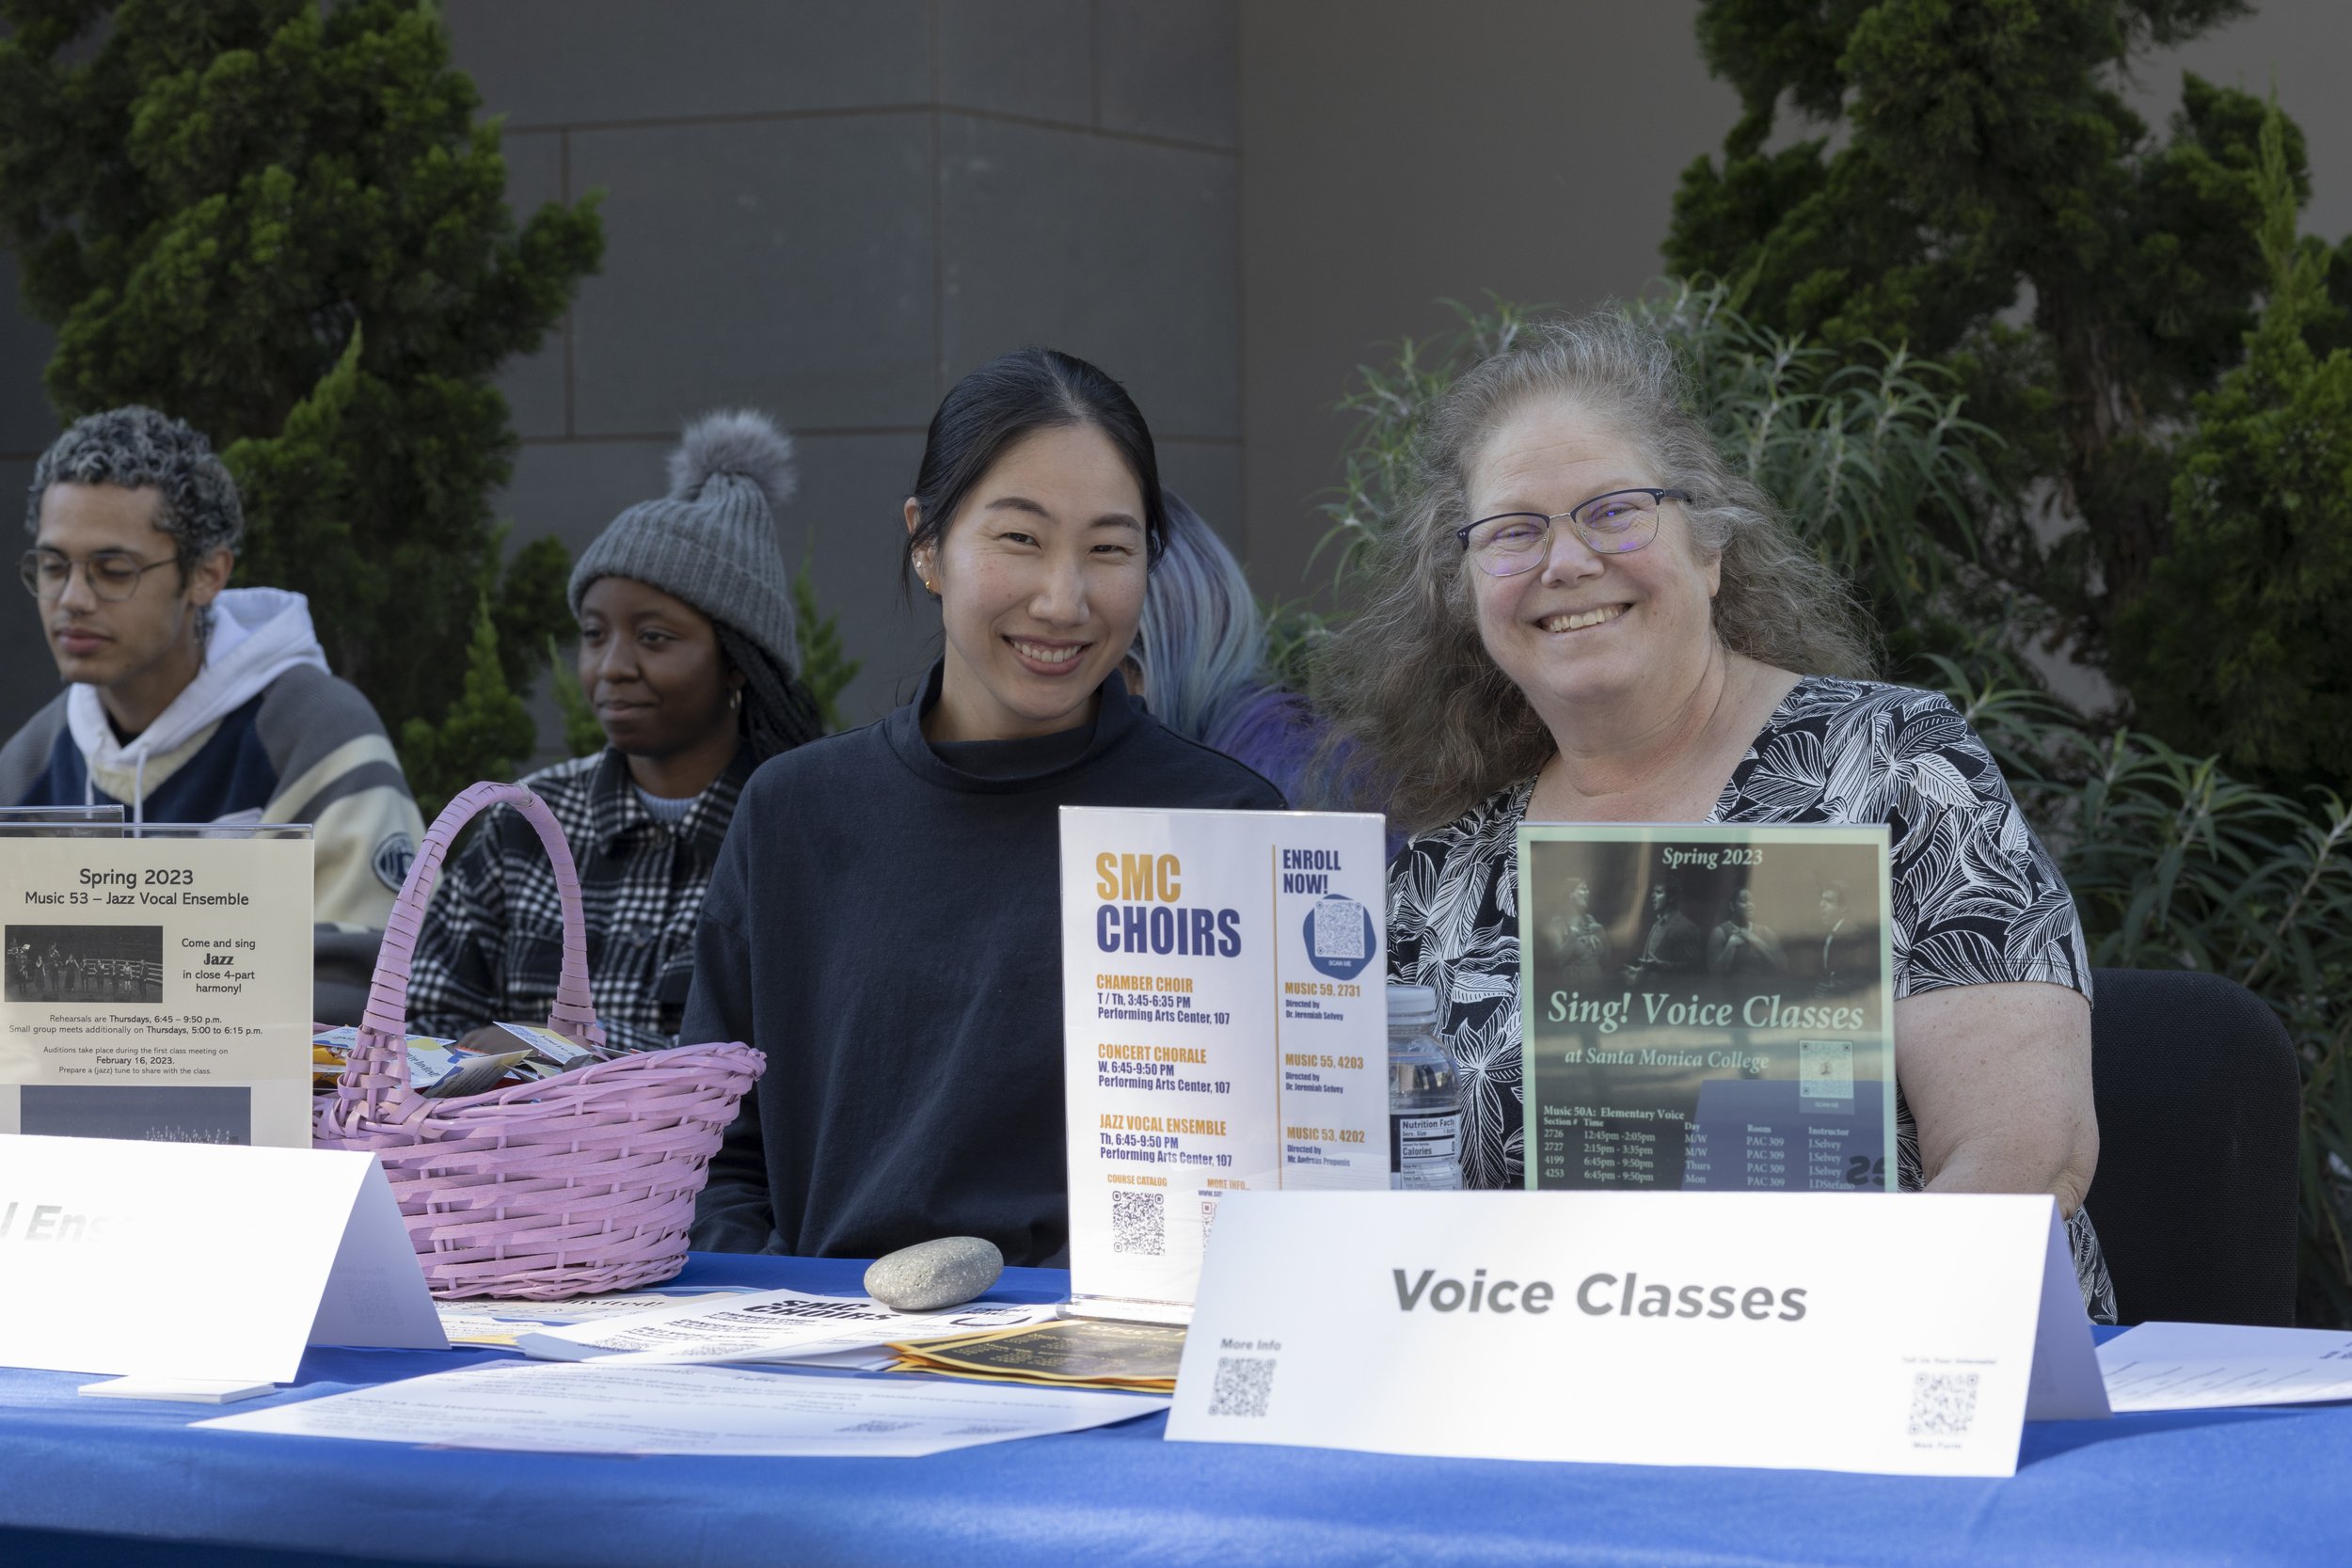  Sang Hee Cho, a staff member of the Jazz Vocal Ensemble (left) and Gina Braz, teachers assistant for voice classes, (right) told me that the Music Department held this event as a marketing event to get students back into the music program. They also